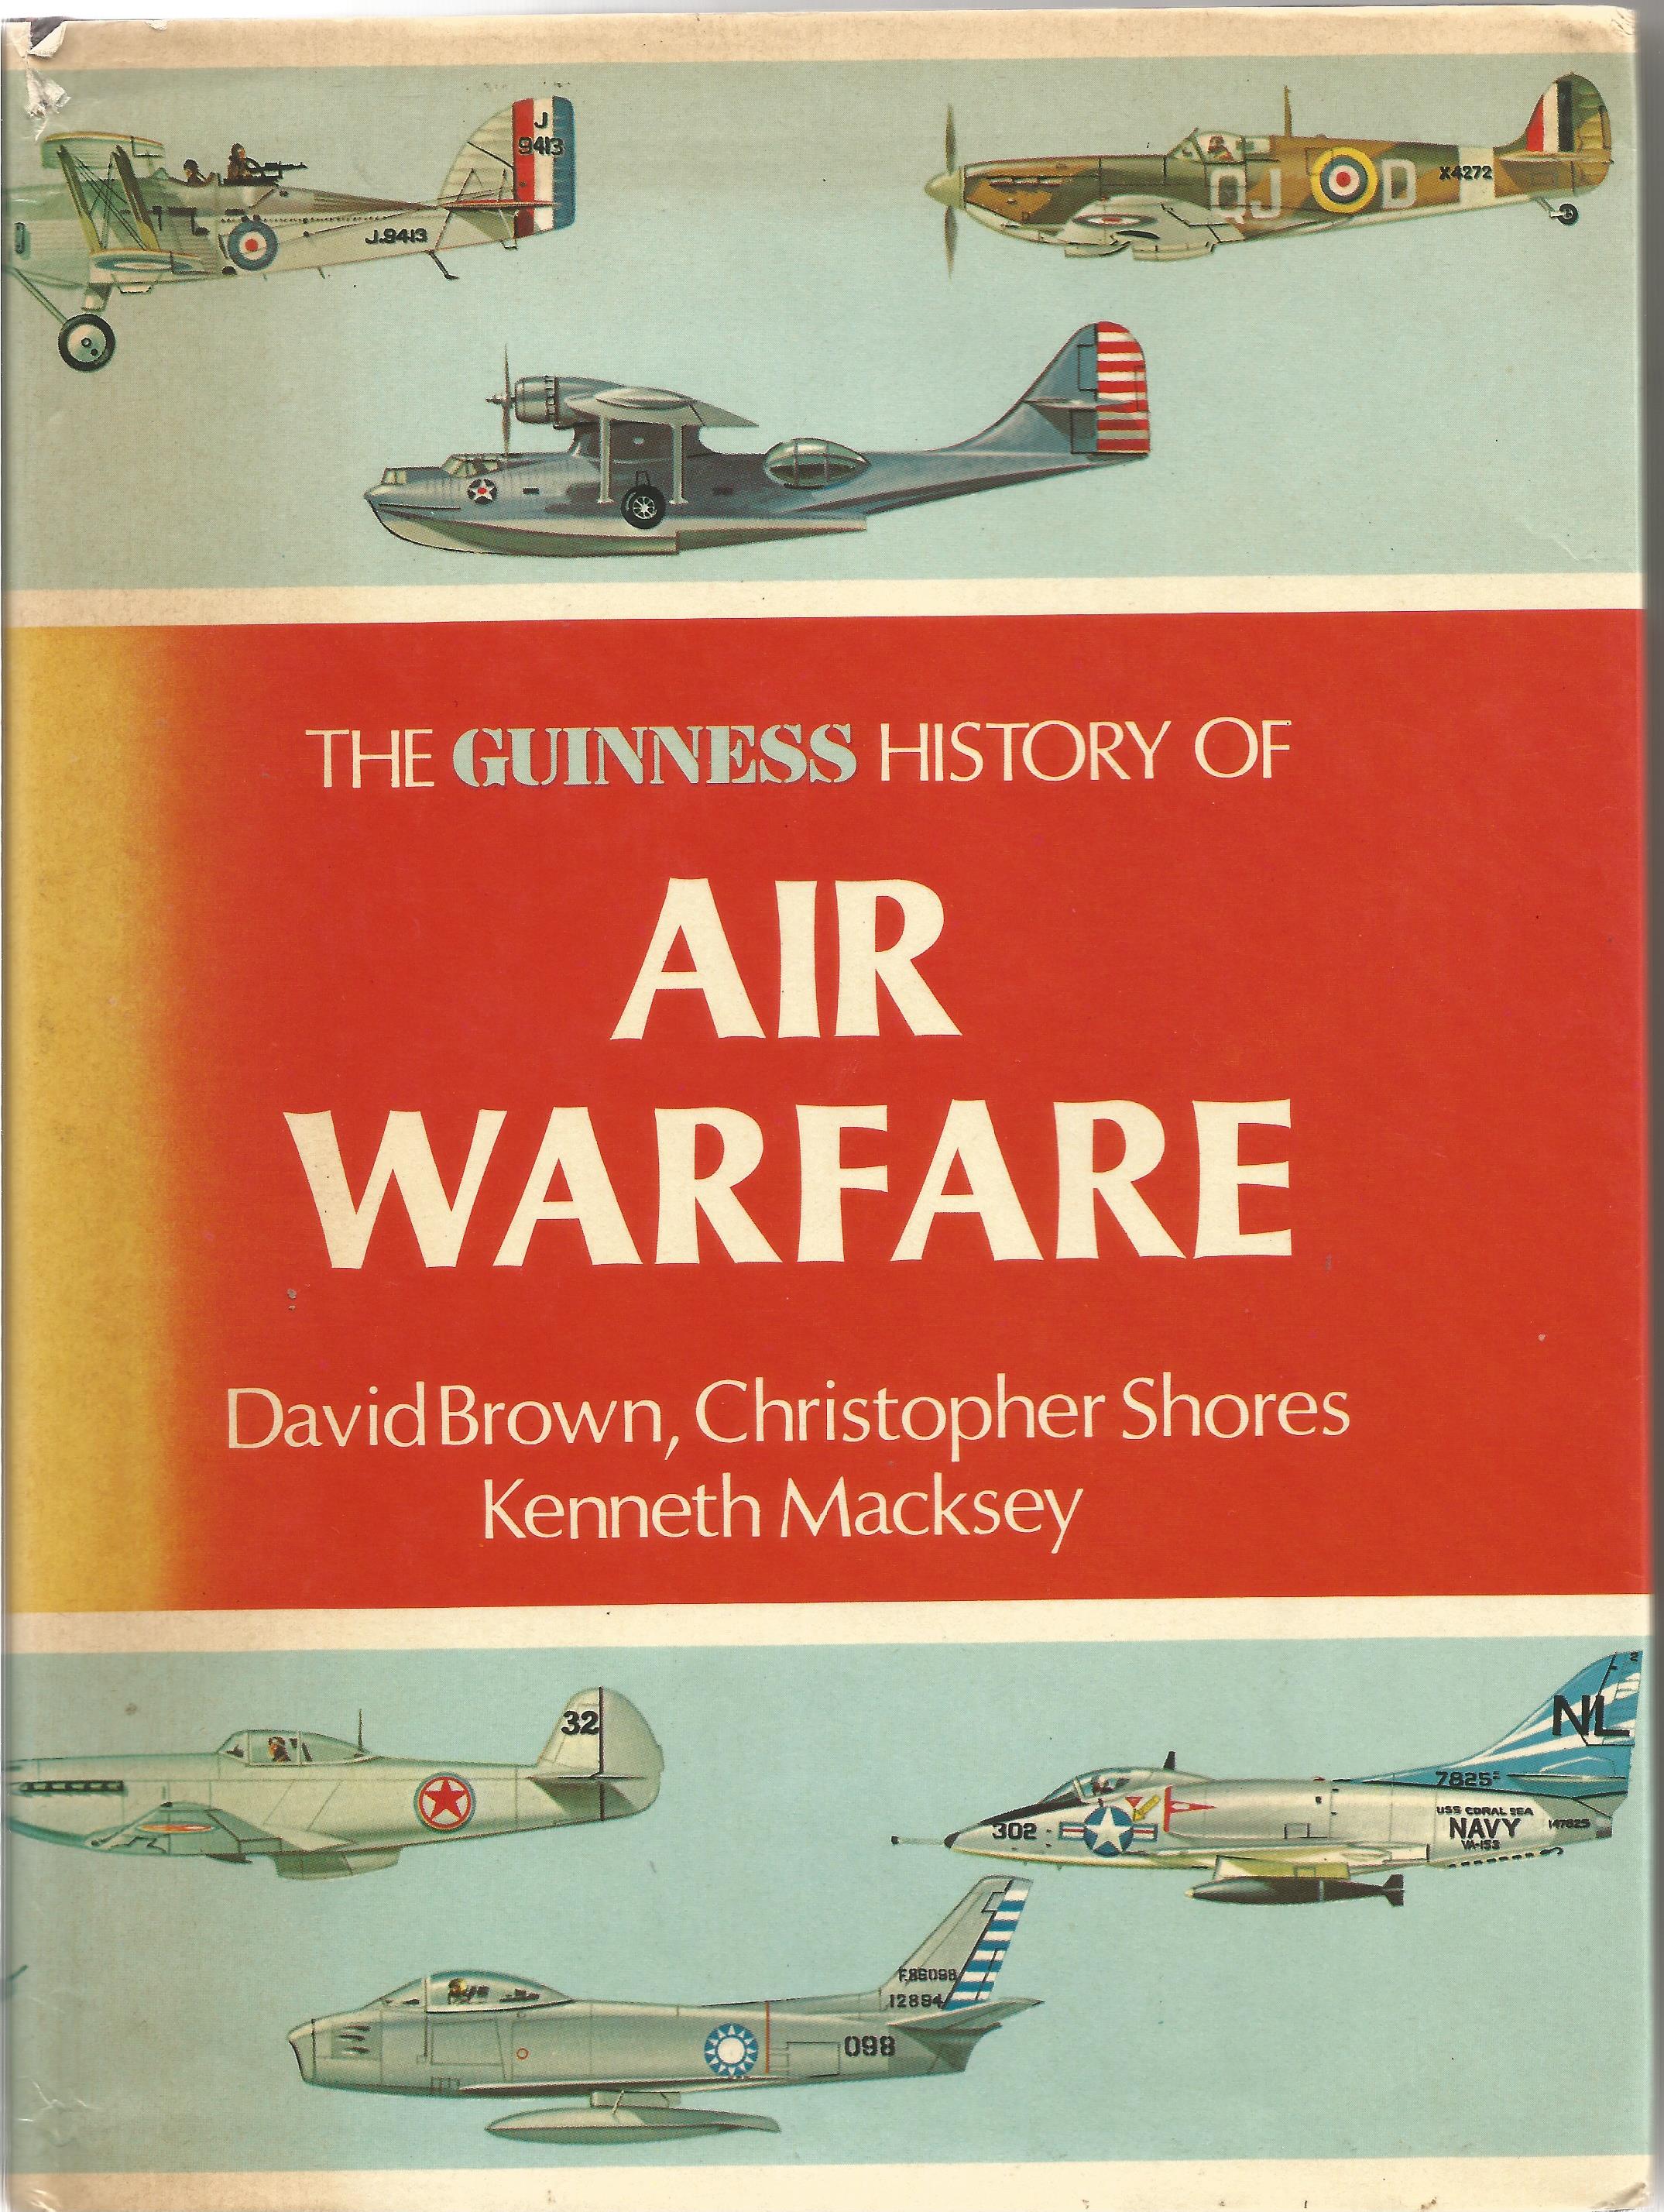 David Brown, Christopher Shores and Kenneth Macksey. The Guinness History Of Air Warfare. A WW2